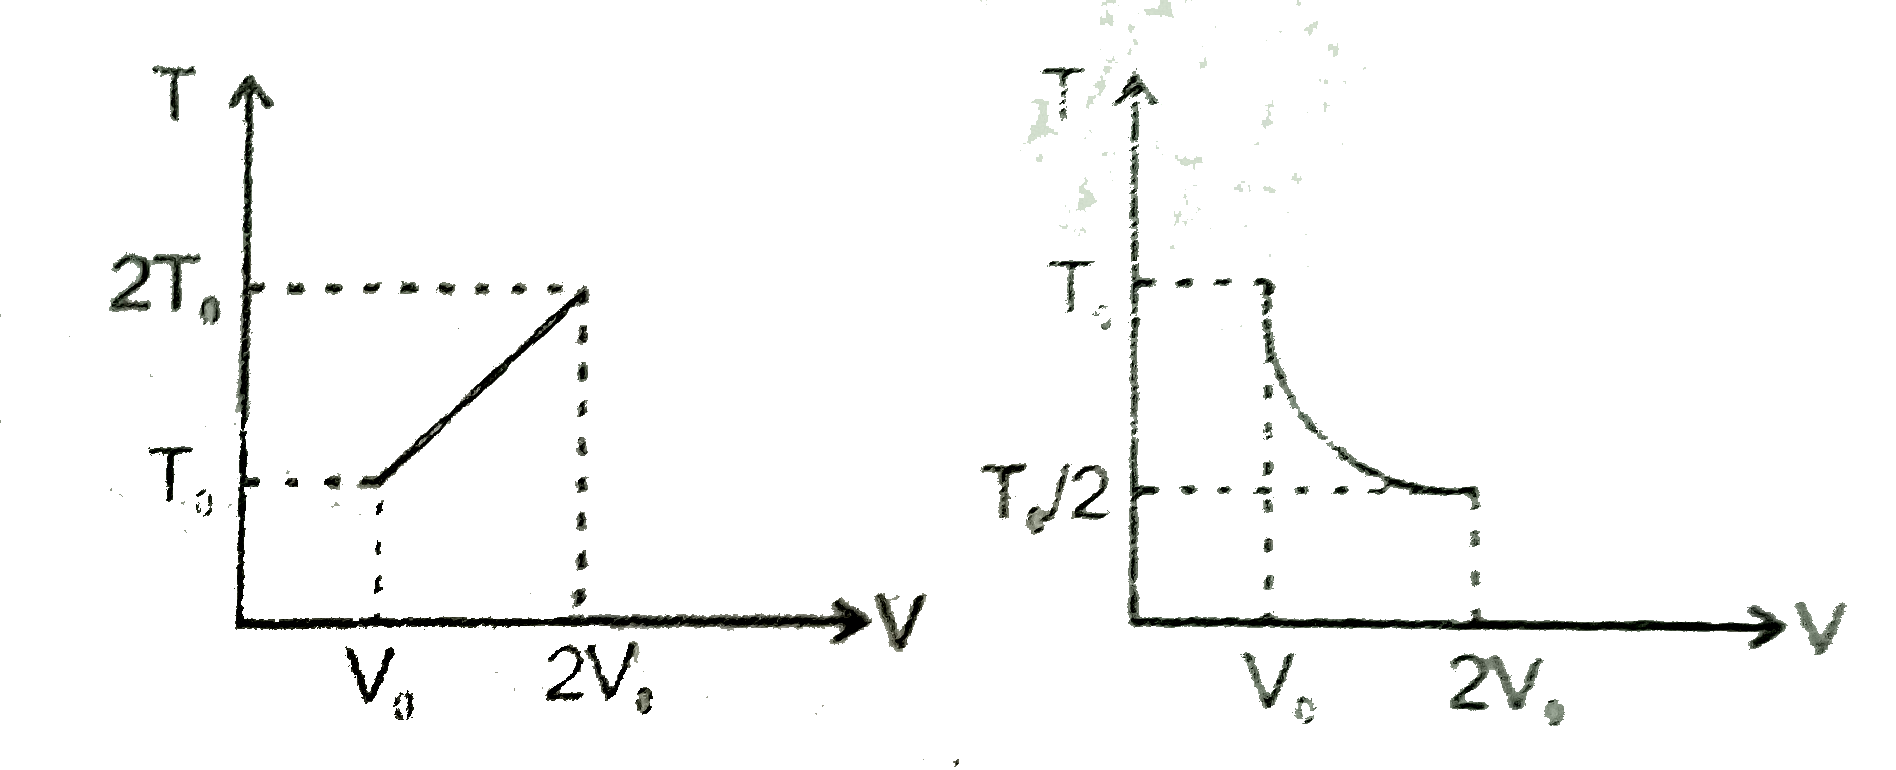 For two thermodynamic process temperature and volume diagram are given. In first process, it is a straight line having initial and final coordinates as (V(0),T(0)) and (2V(0), 2T(0)), where as in second process it is a rectangular hyperbola having intial and final coordinates (V(0),T(0)) and (2V(0), T(0)//2). Then ratio of work doen in the two process must be